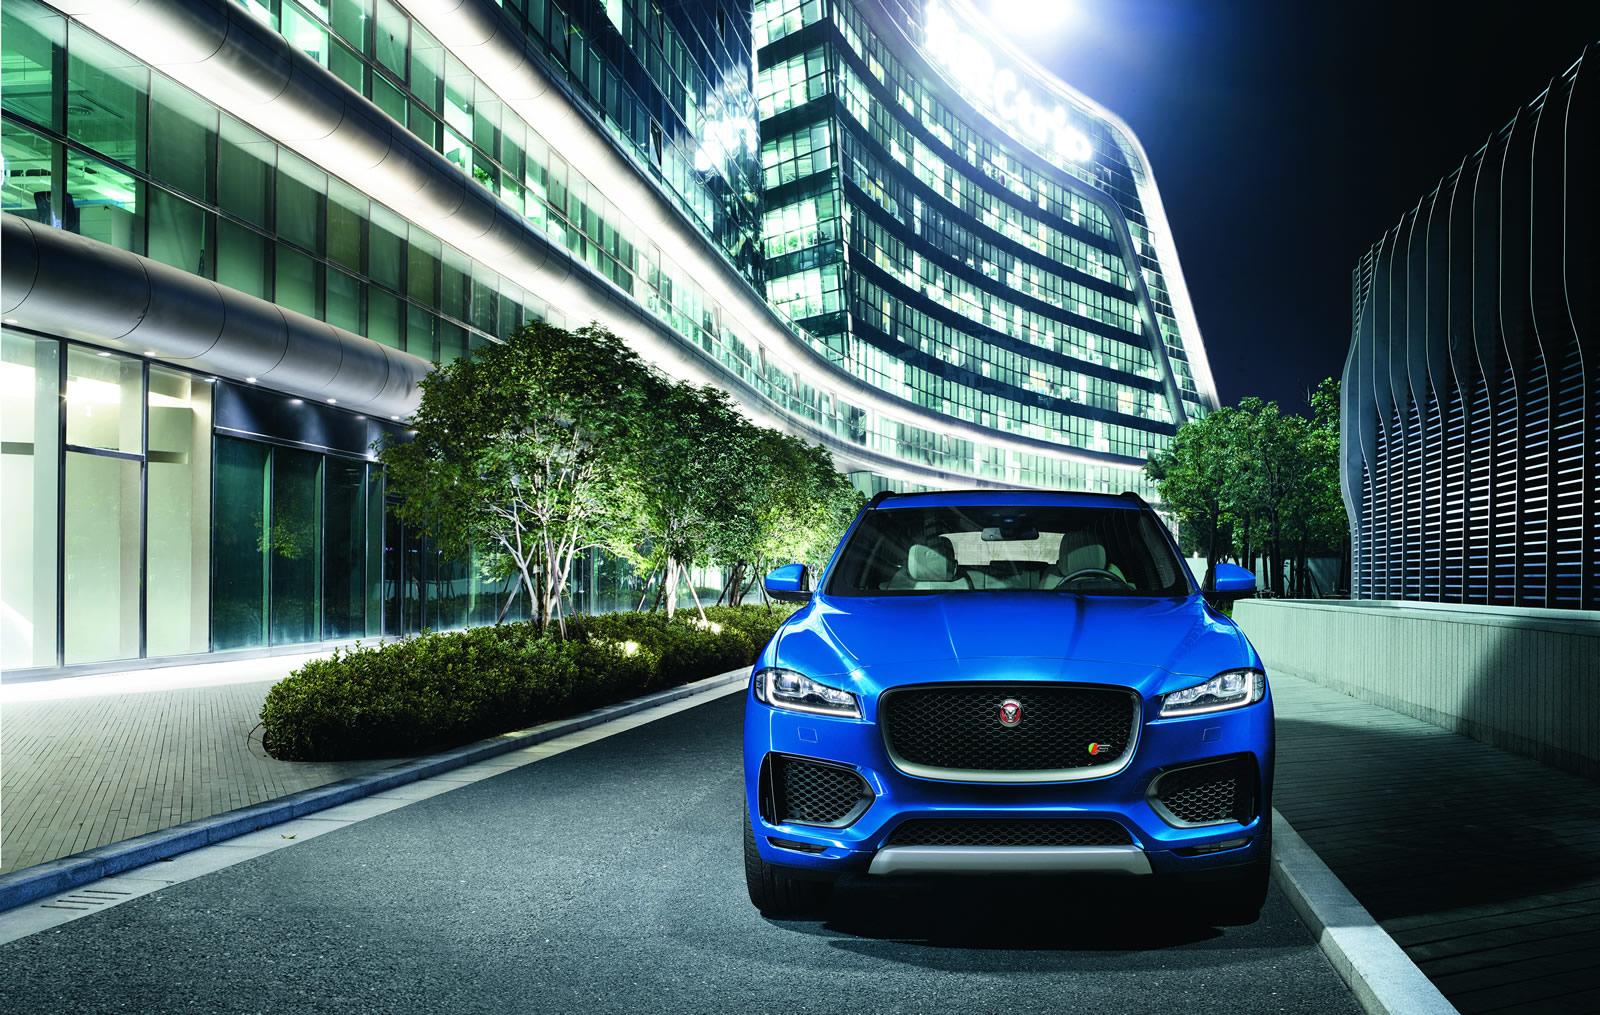 Jaguar developing all-electric E-Pace